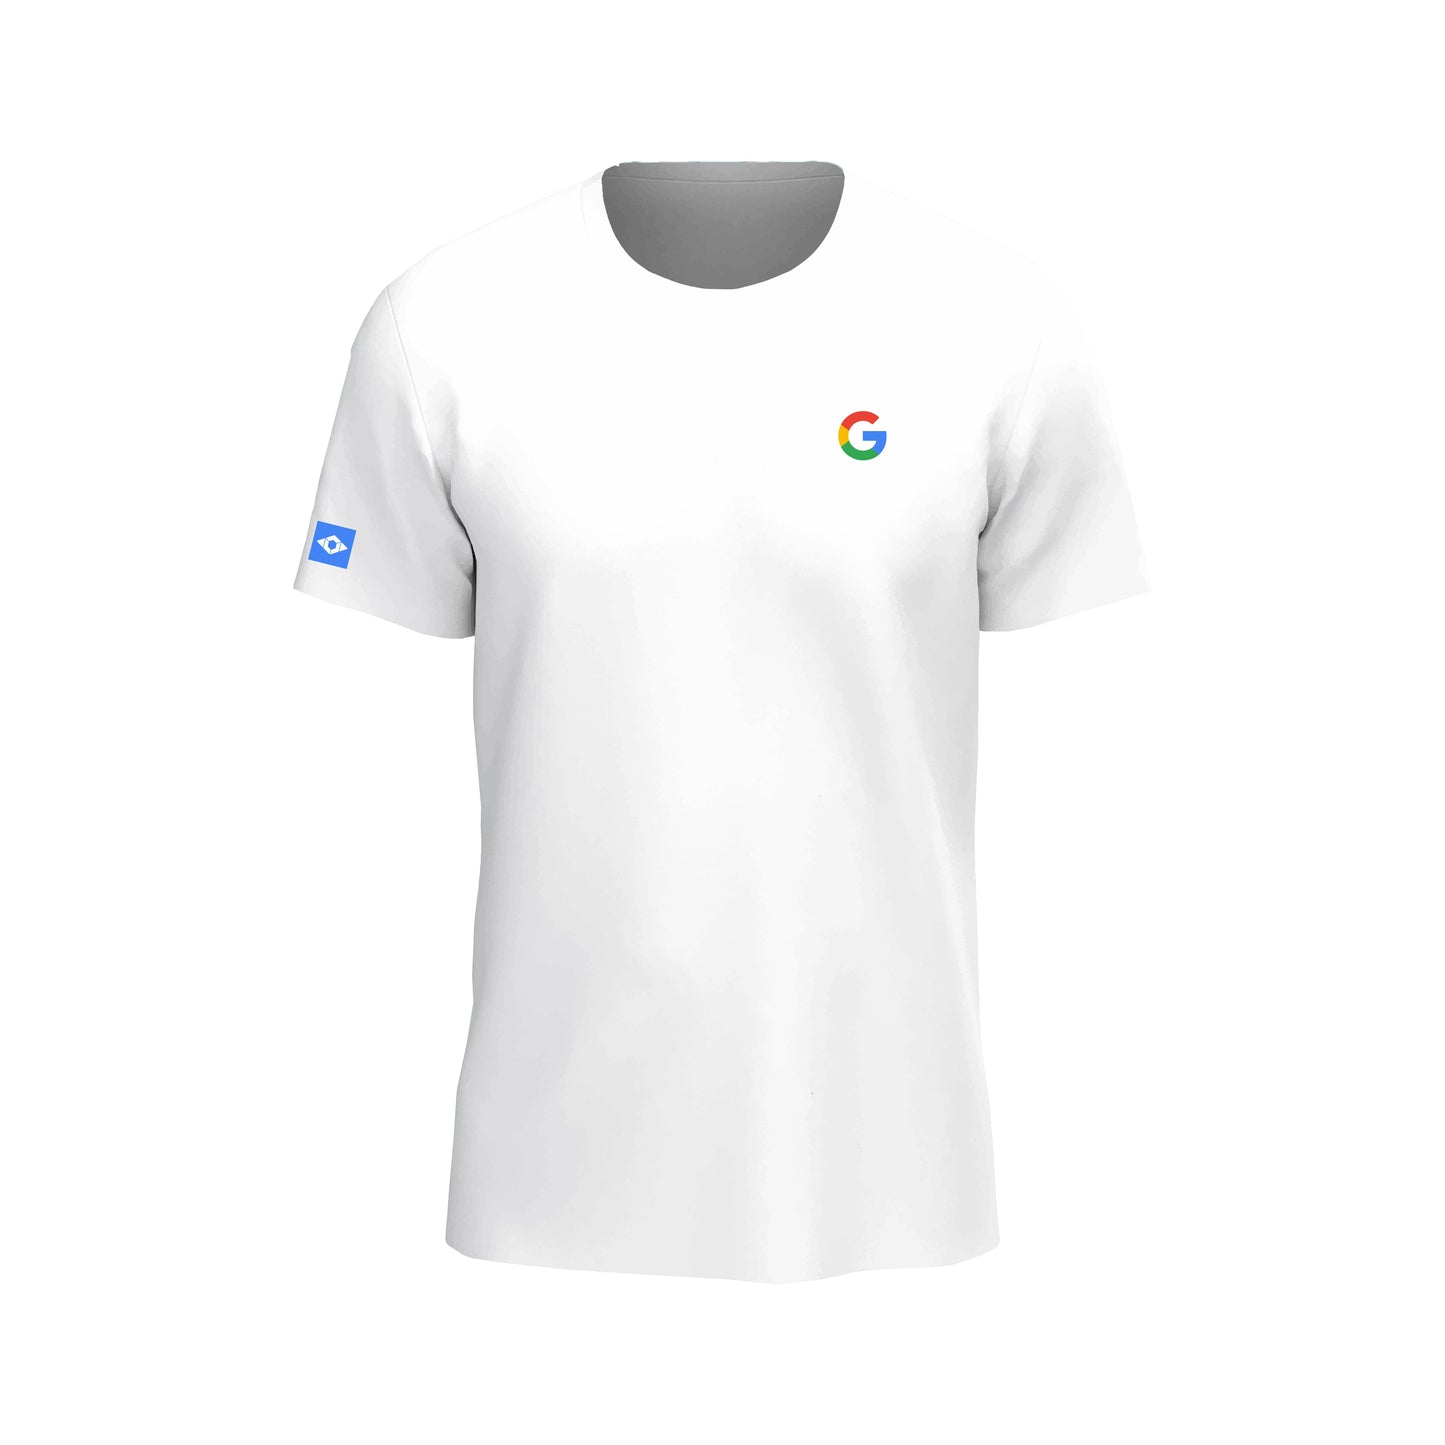 Google - Union of Forces ® T-Shirt by Athletic Forces -  Model 3